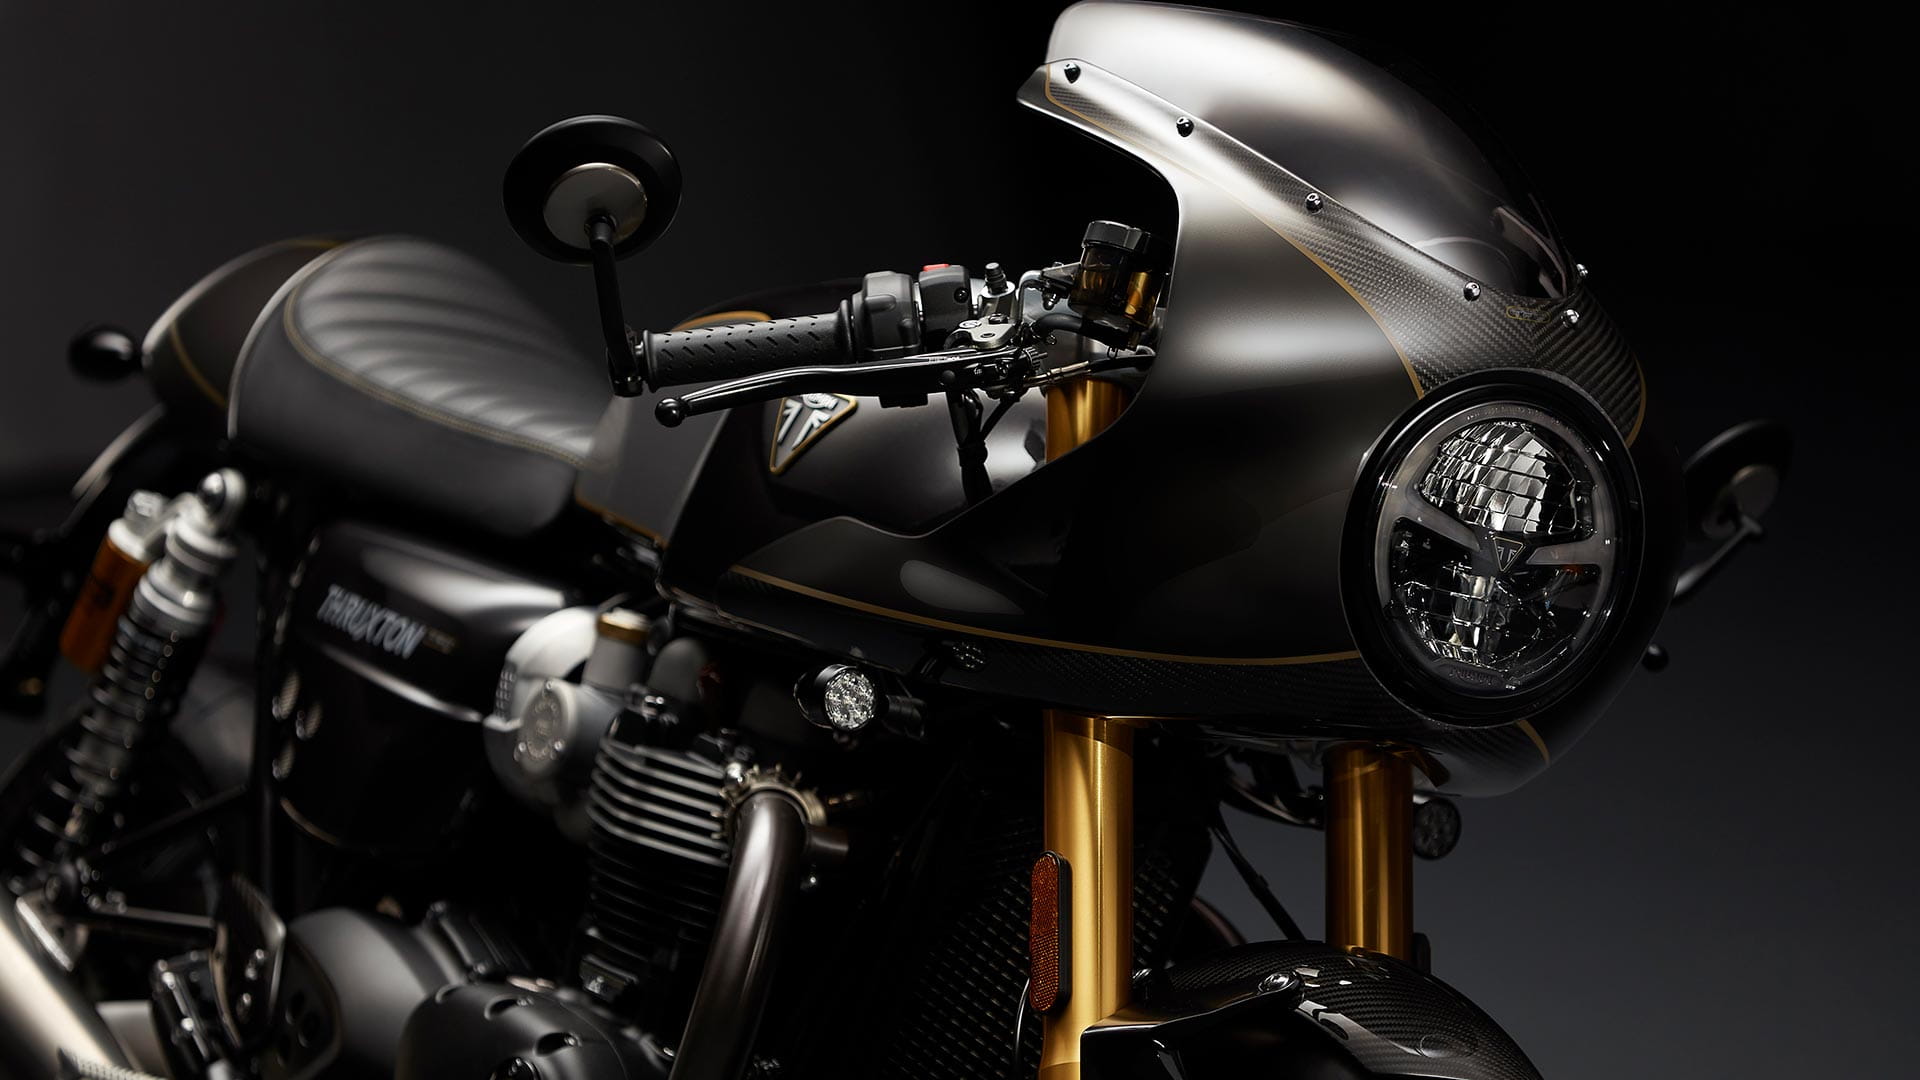 Triumph Thruxton TFC front shot featuring unique gold front forks and full fairing